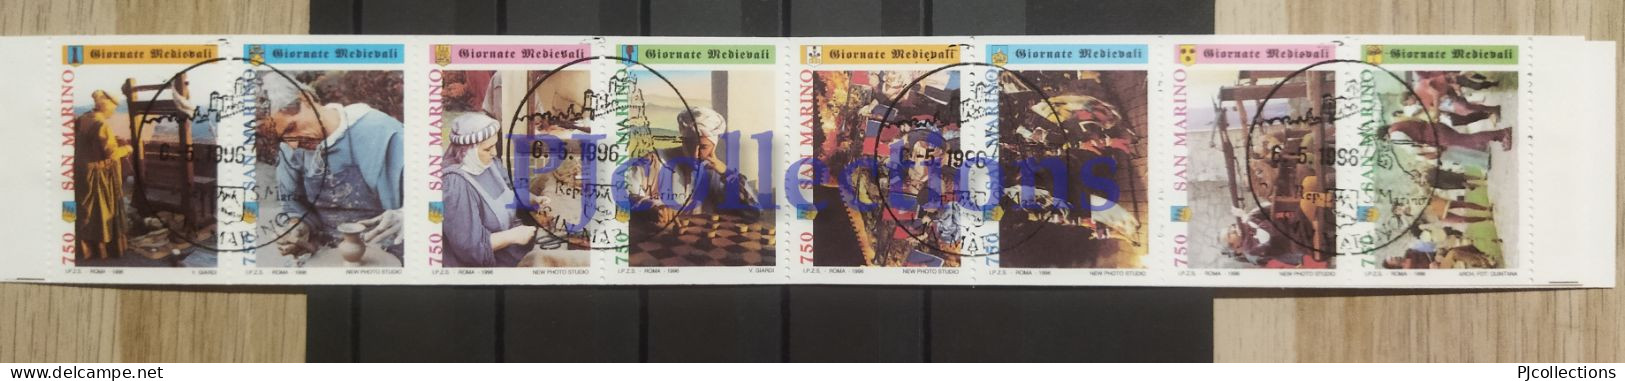 4578-SAN MARINO 1996 GIORNATE MEDIEVALI - MEDIEVAL DAYS FULL BOOKLET 8 STAMPS C/ANNULLO 1° GIORNO - USED - Used Stamps